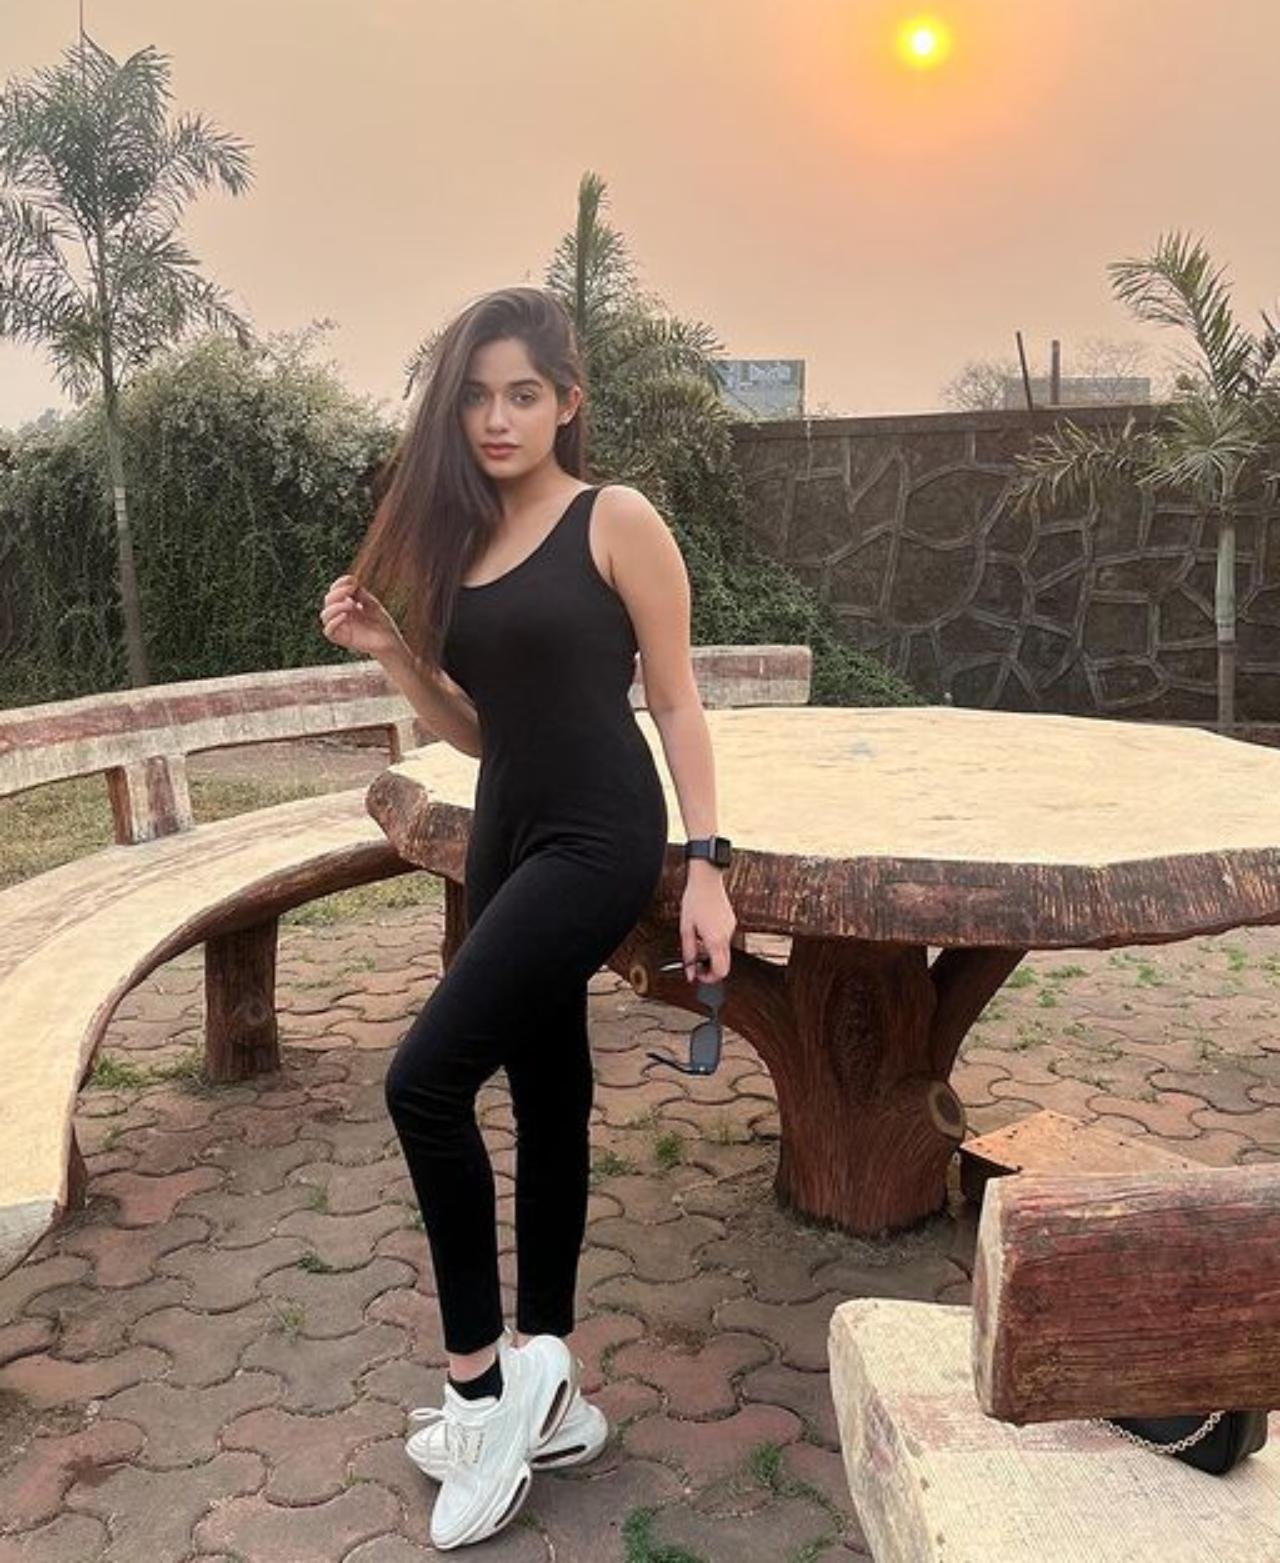 Jannat Zubair looks absolutely stunning in this black sporty outfit that she has paired with white sneakers